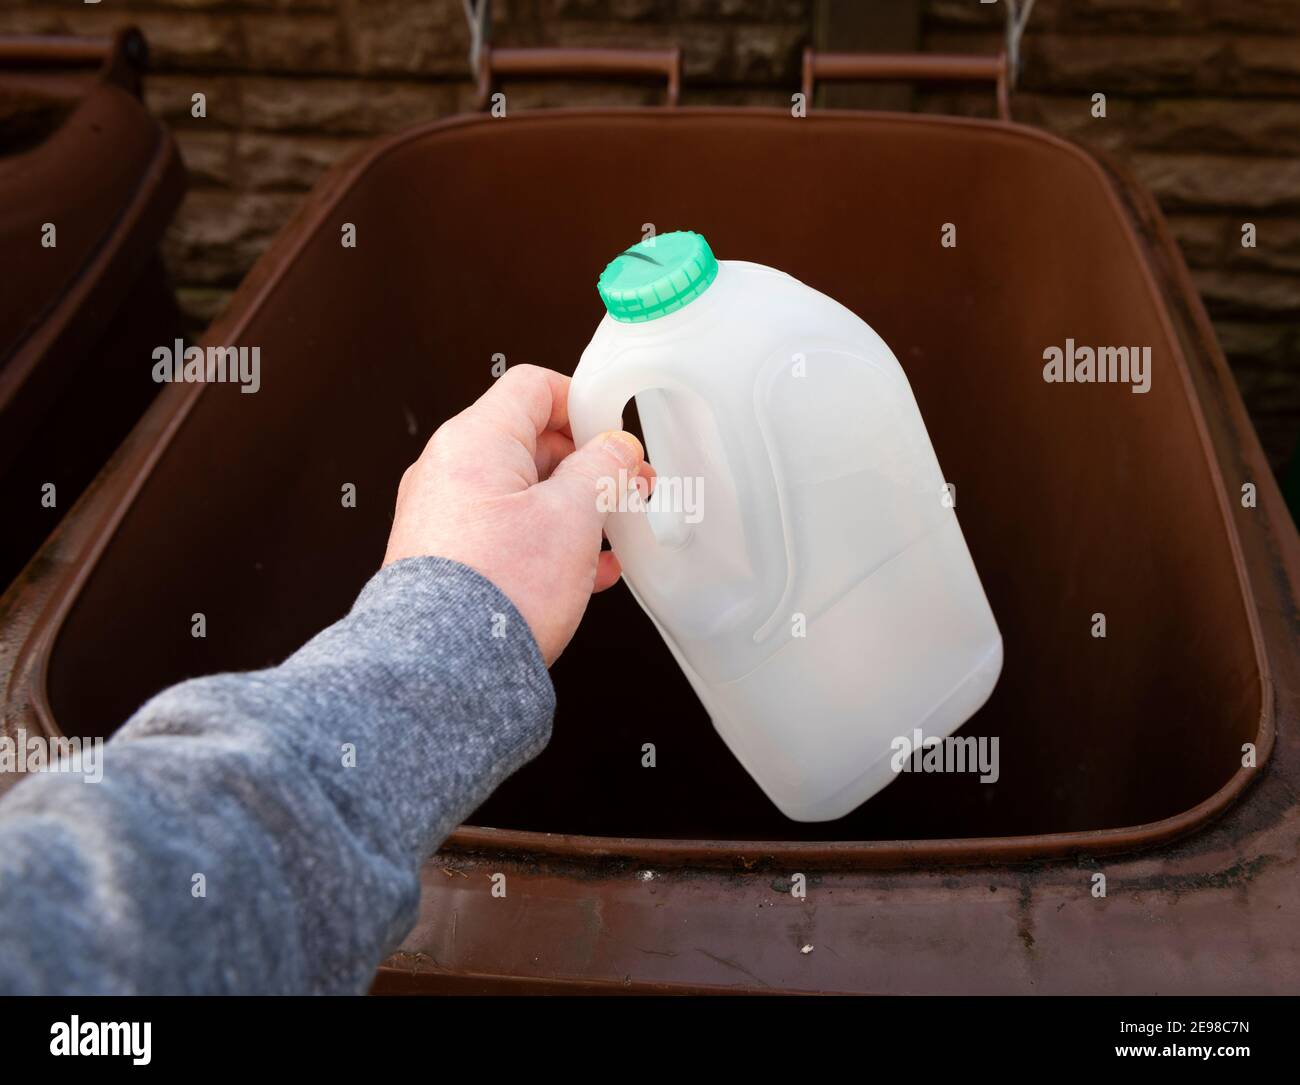 Throwing away a plastic milk bottle for recycling Stock Photo